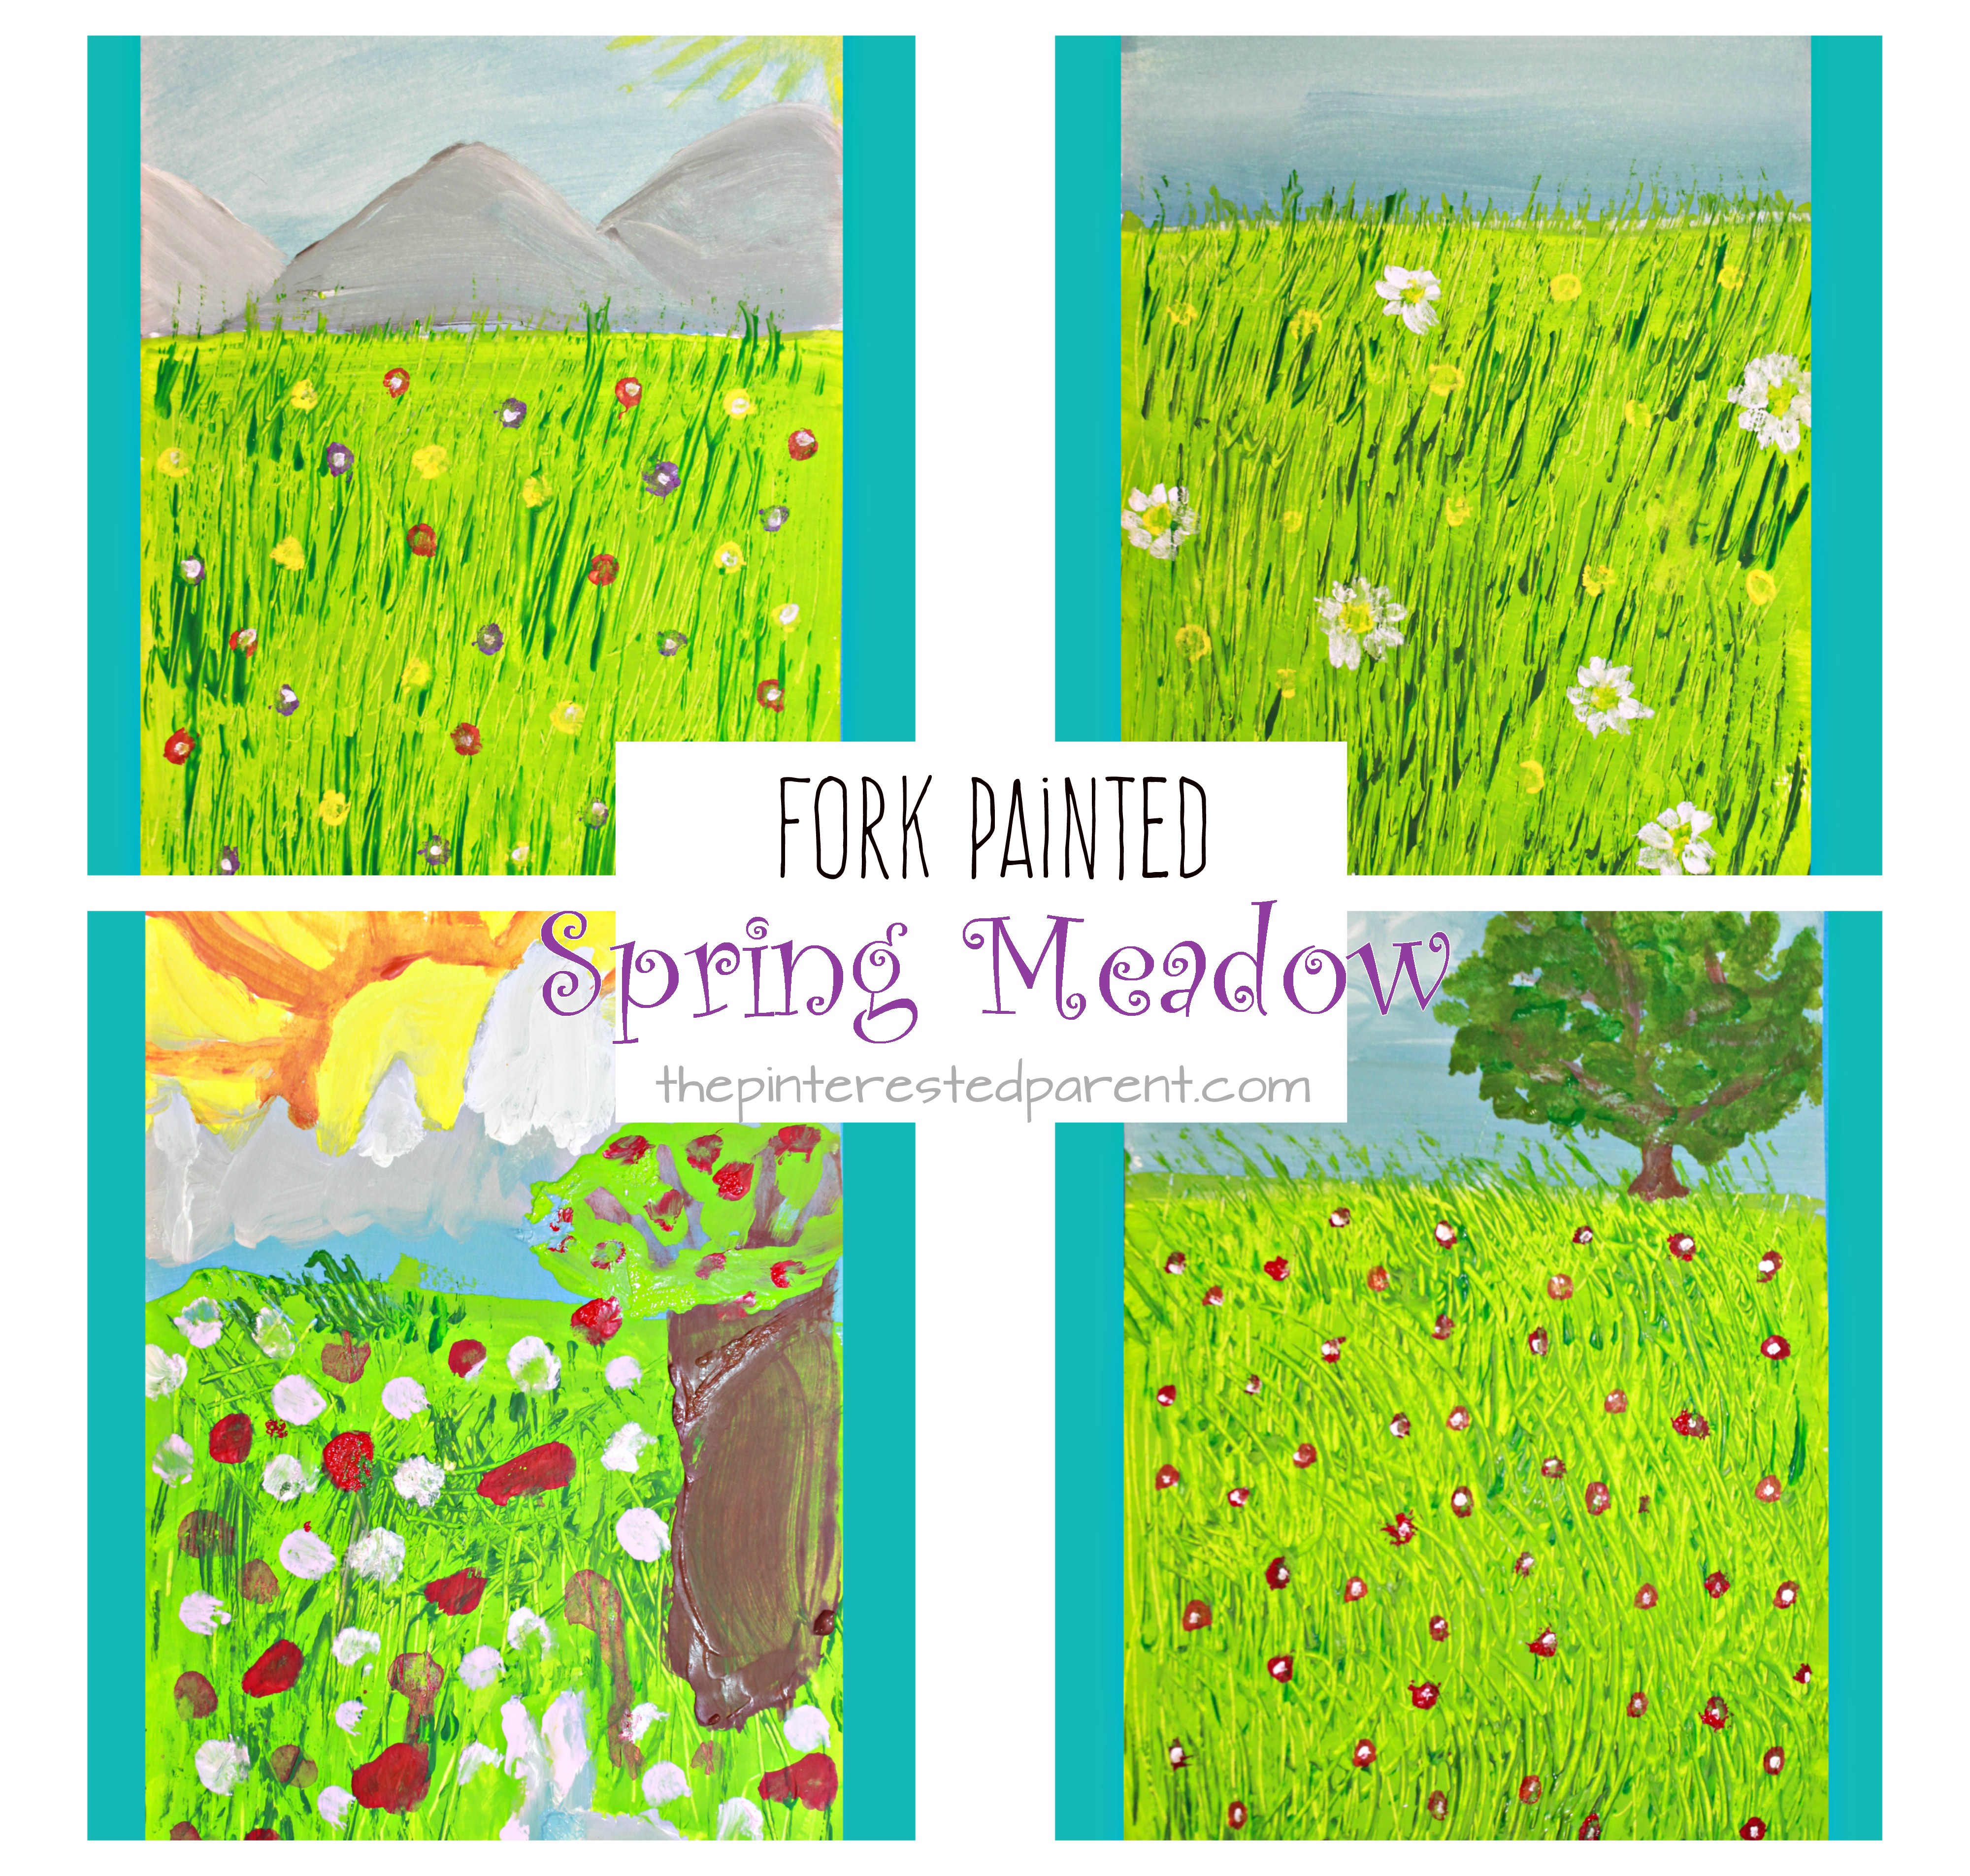 Fork Painted Spring Meadow - kids art projects for the spring. Fun arts and crafts project